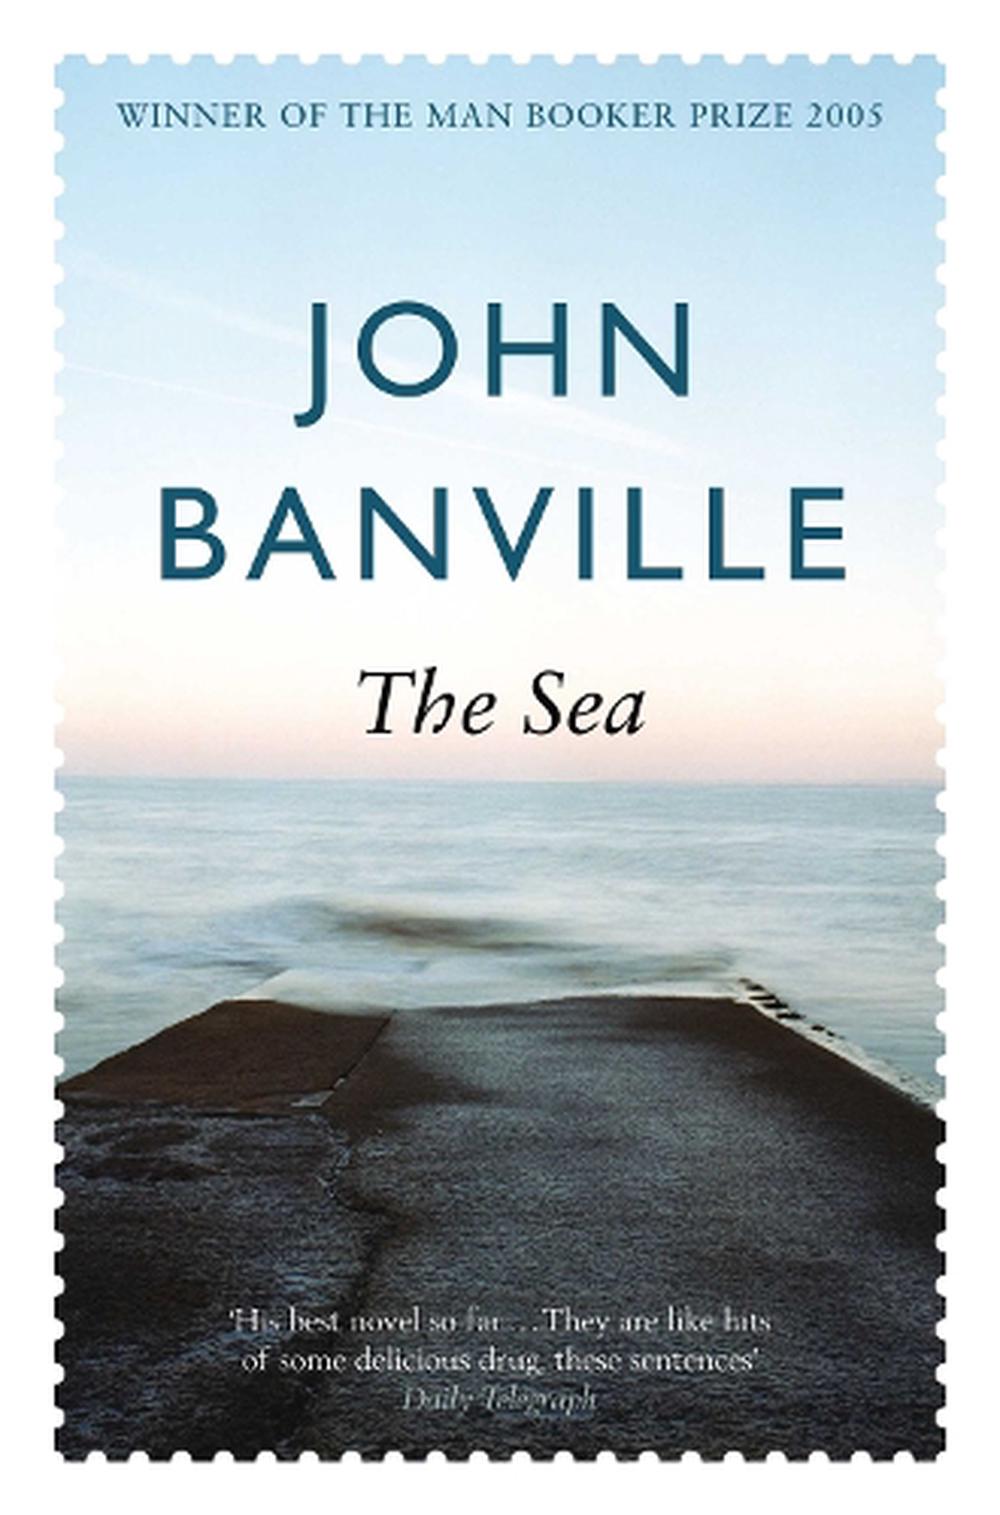 The Sea by John Banville, Paperback, 9780330483292 Buy online at The Nile